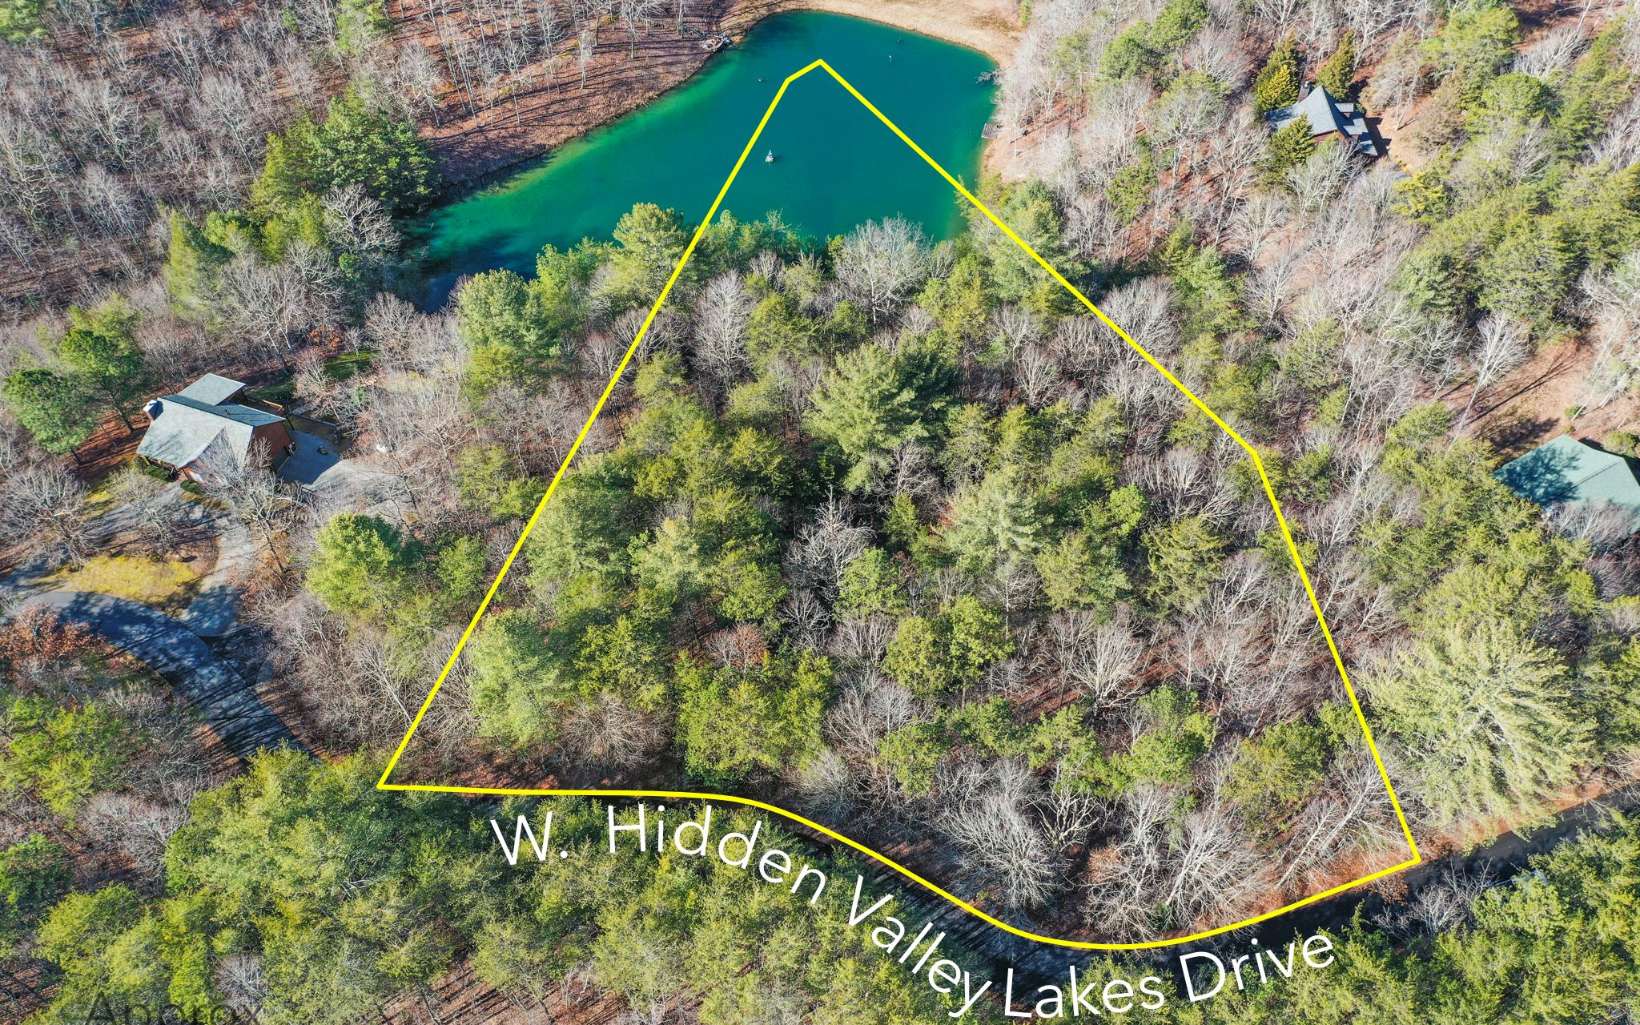 PRICE IMPROVEMENT!! PRIVATE GATED COMMUNITY WITH LAKE FRONTAGE... 185 pristine ac S/D with 4 lakes. All paved access city water available, underground utilities and mtn views in private forestry setting! Gentle laying 2.51 ac lot w/ generous lake frontage. The possibilities are endless w/ this lot. No 4x4 needed, under 5 miles to downtown McCaysville and secure neighborhood!